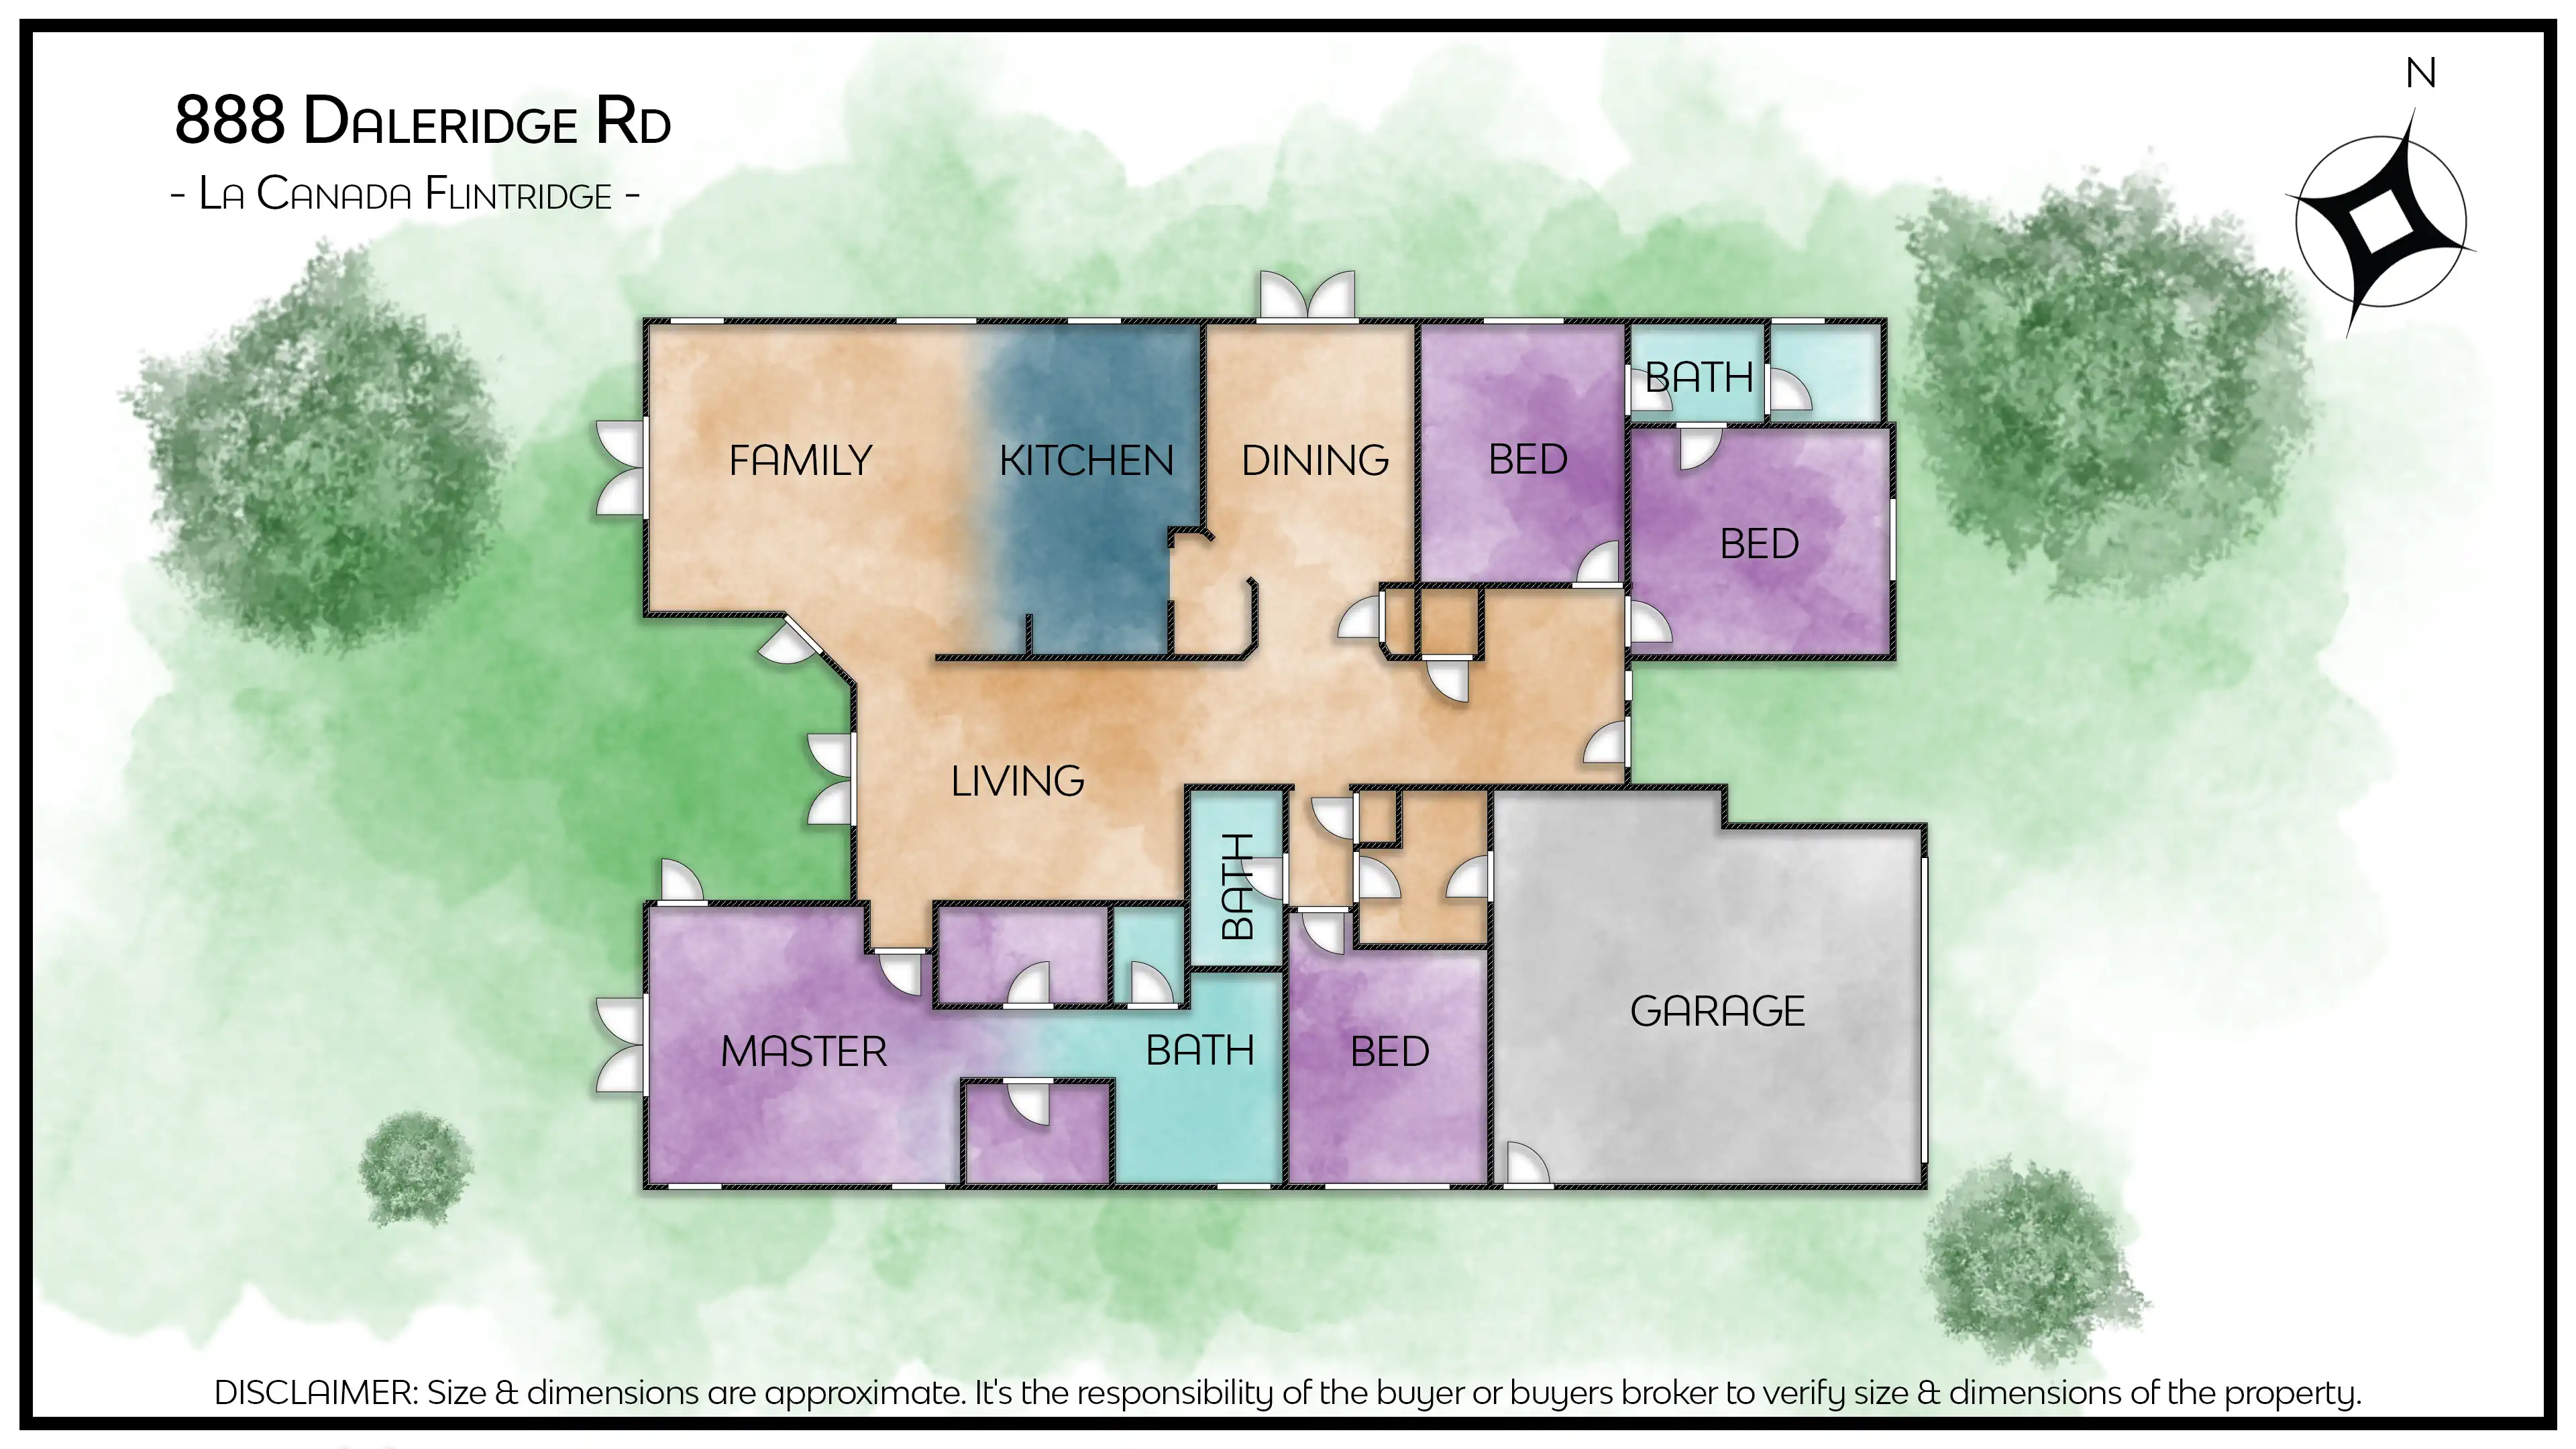 Artistic watercolor floor plan image. Delicately crafted with soft, flowing strokes, the plan features intricate details of the property's layout, including rooms, dimensions, and other living spaces. The unique blend of colors and textures creates a beautiful, one-of-a-kind masterpiece that adds a touch of creativity to any space.